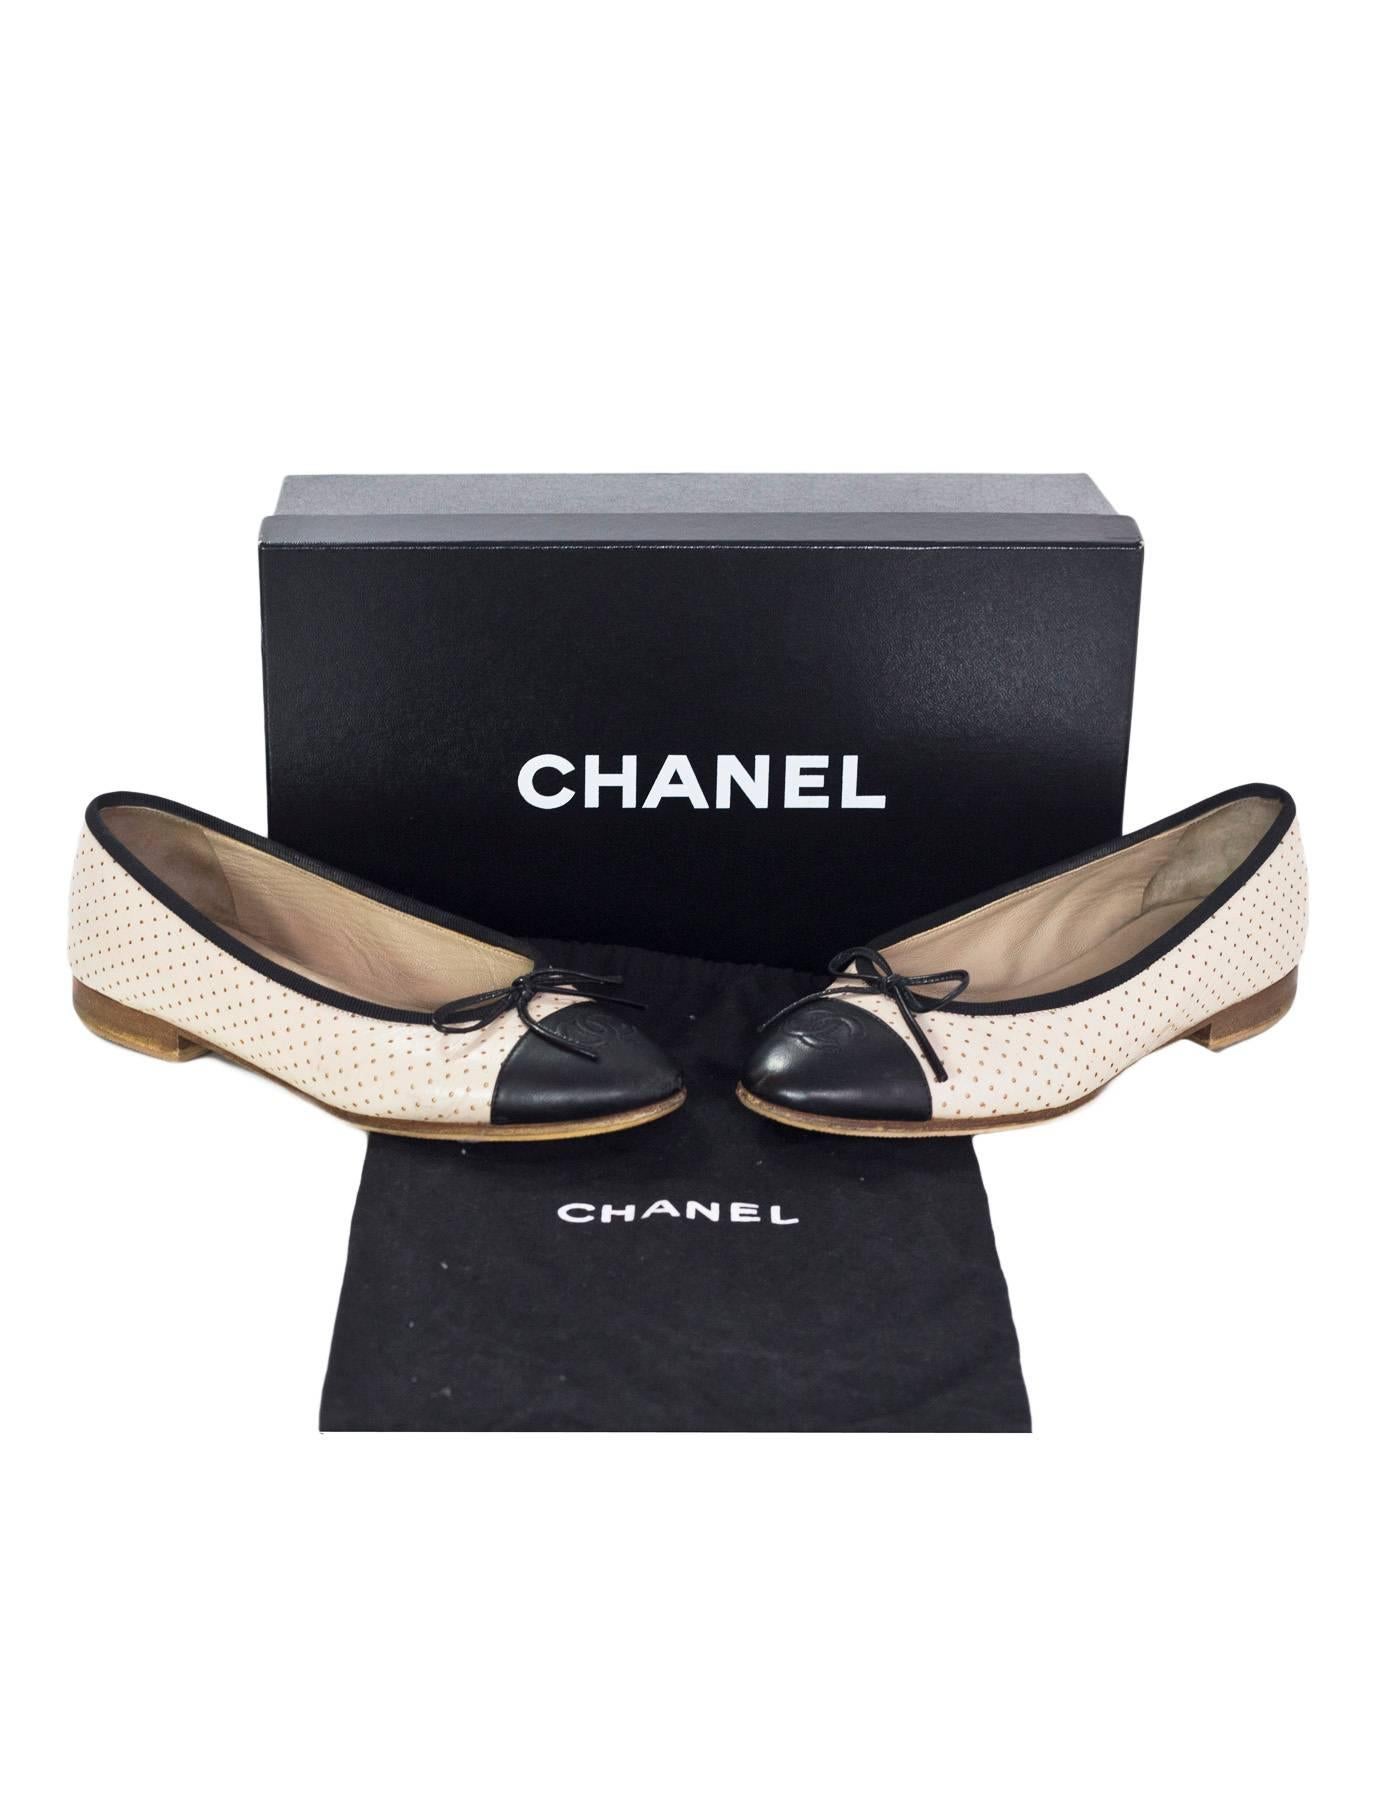 Women's Chanel Beige & Black Perforated Ballet Flats Sz 36 with Box